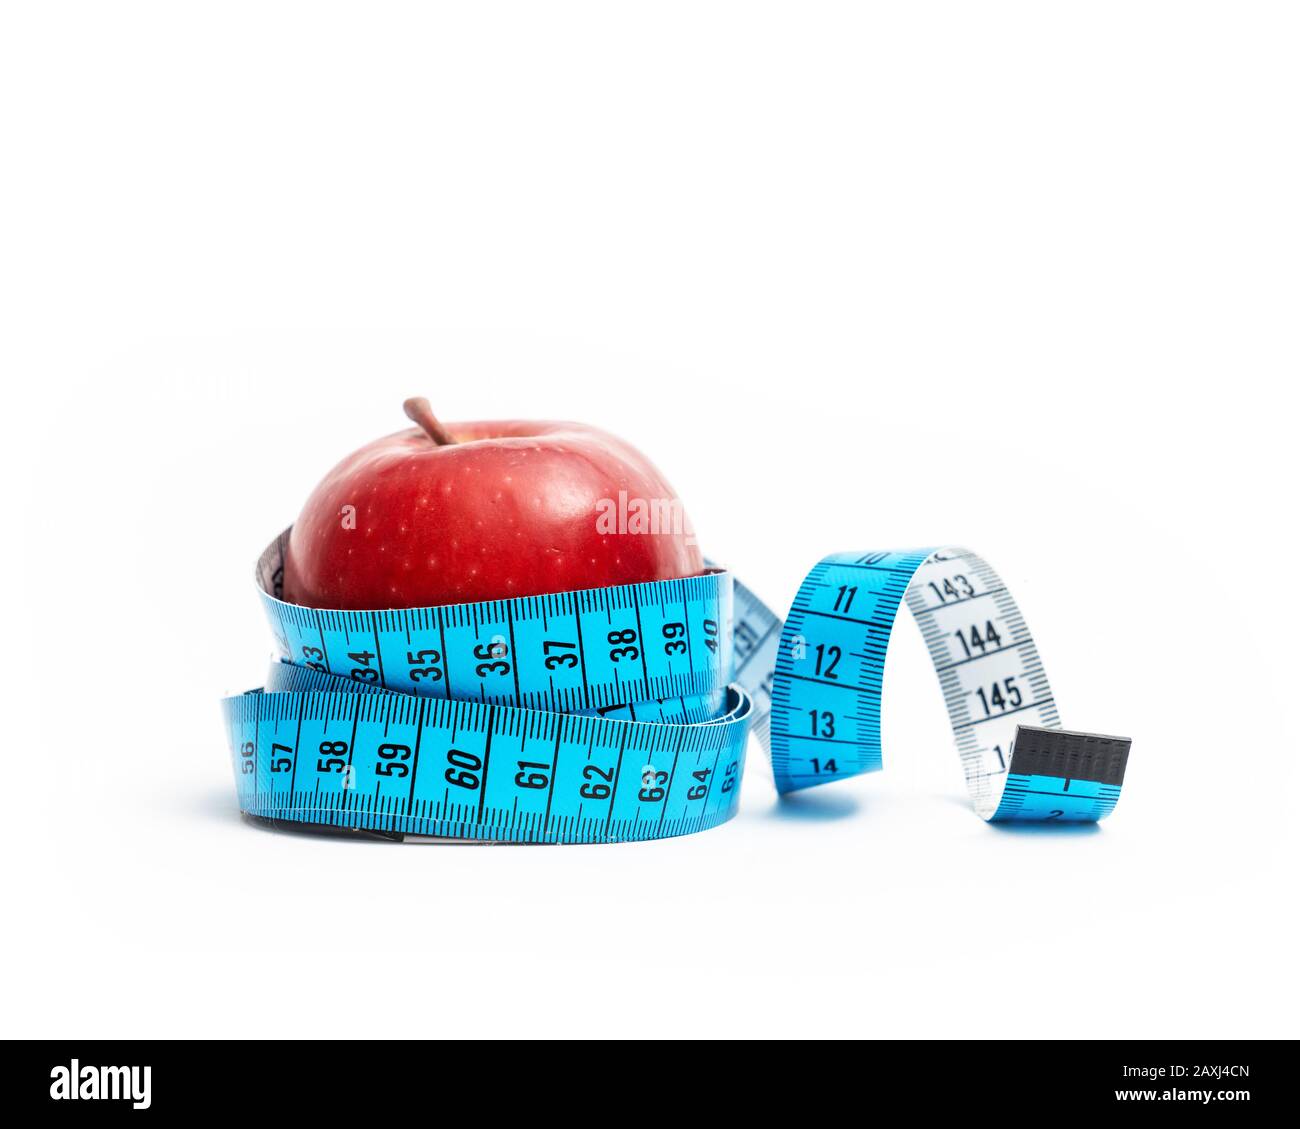 isolated red apple wrapped with tape measuring on white background. Diet and healthy living concept Stock Photo